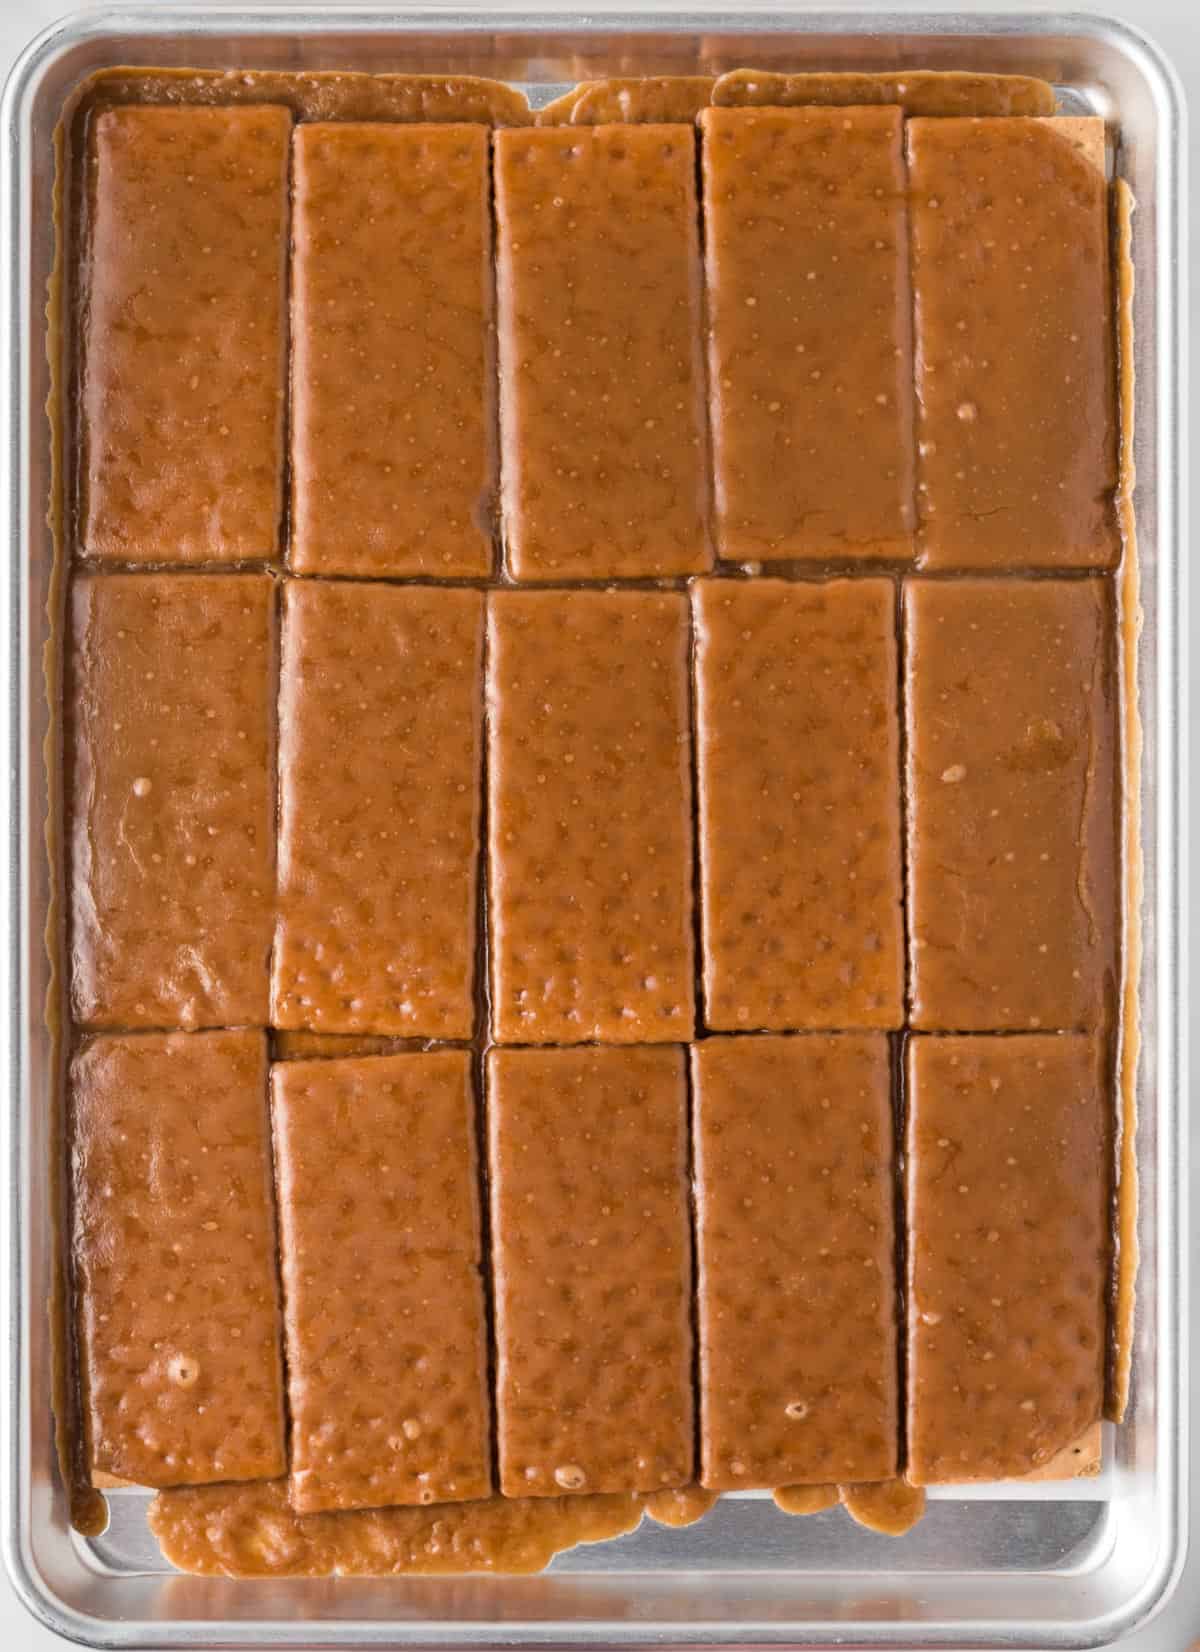 graham crackers after baking with toffee